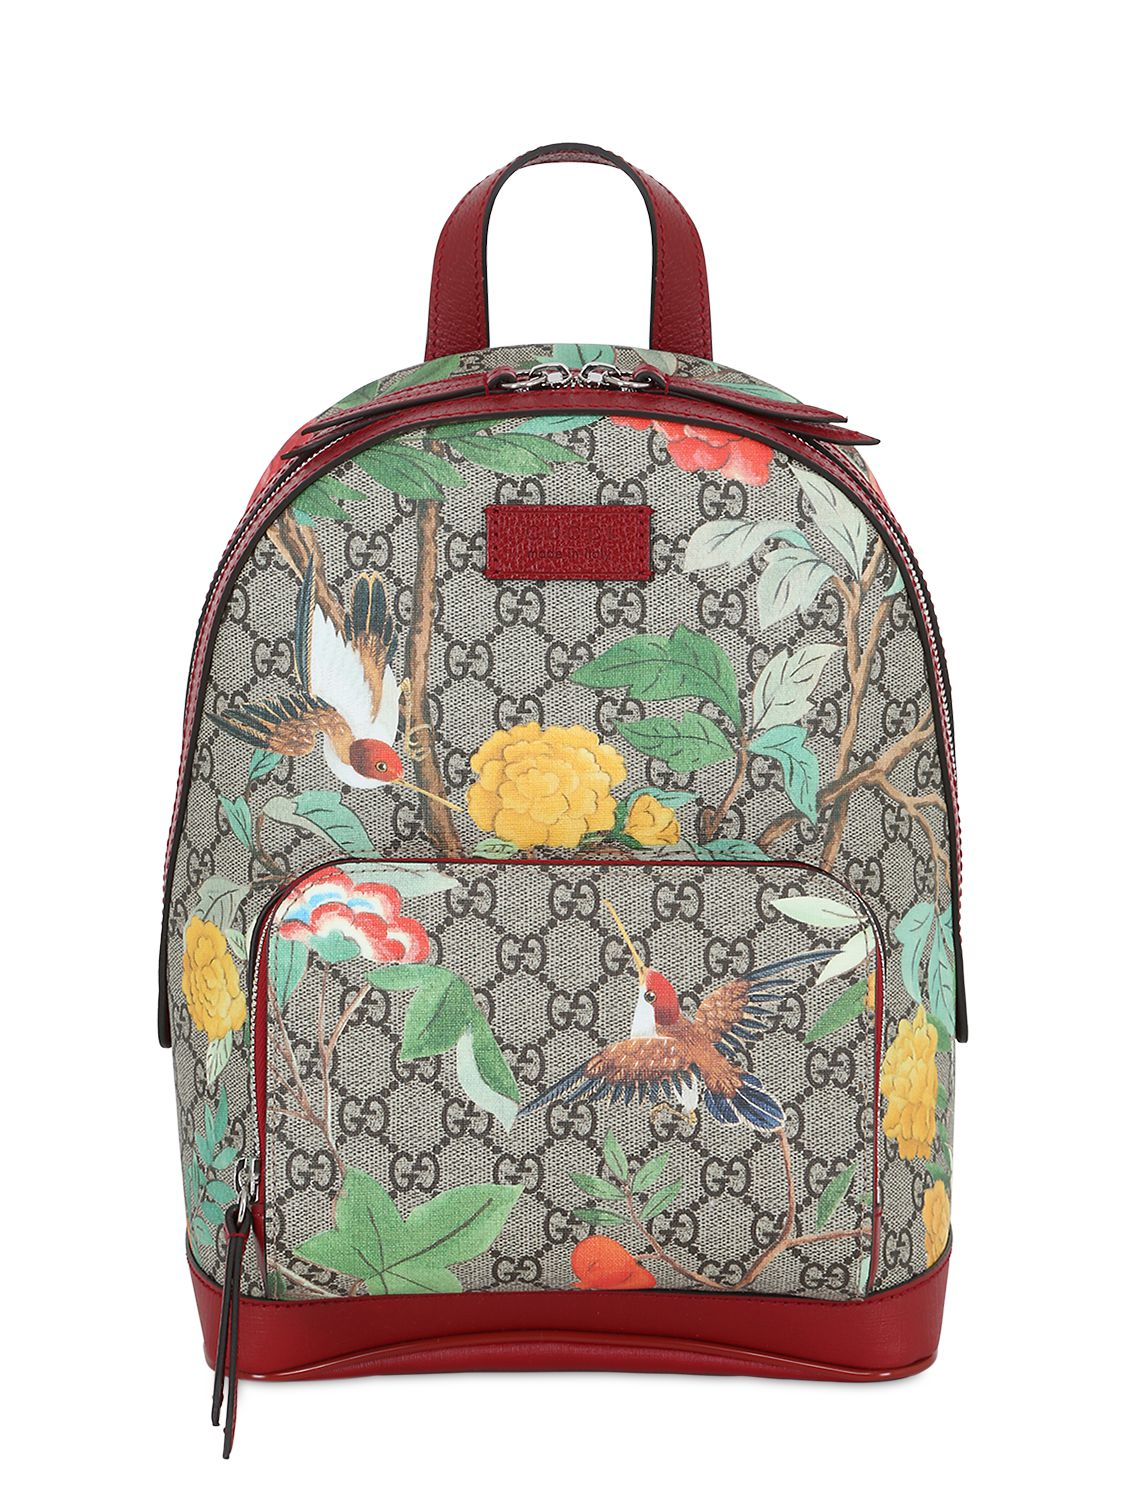 Lyst - Gucci Tian GG Supreme Leather Backpack for Men